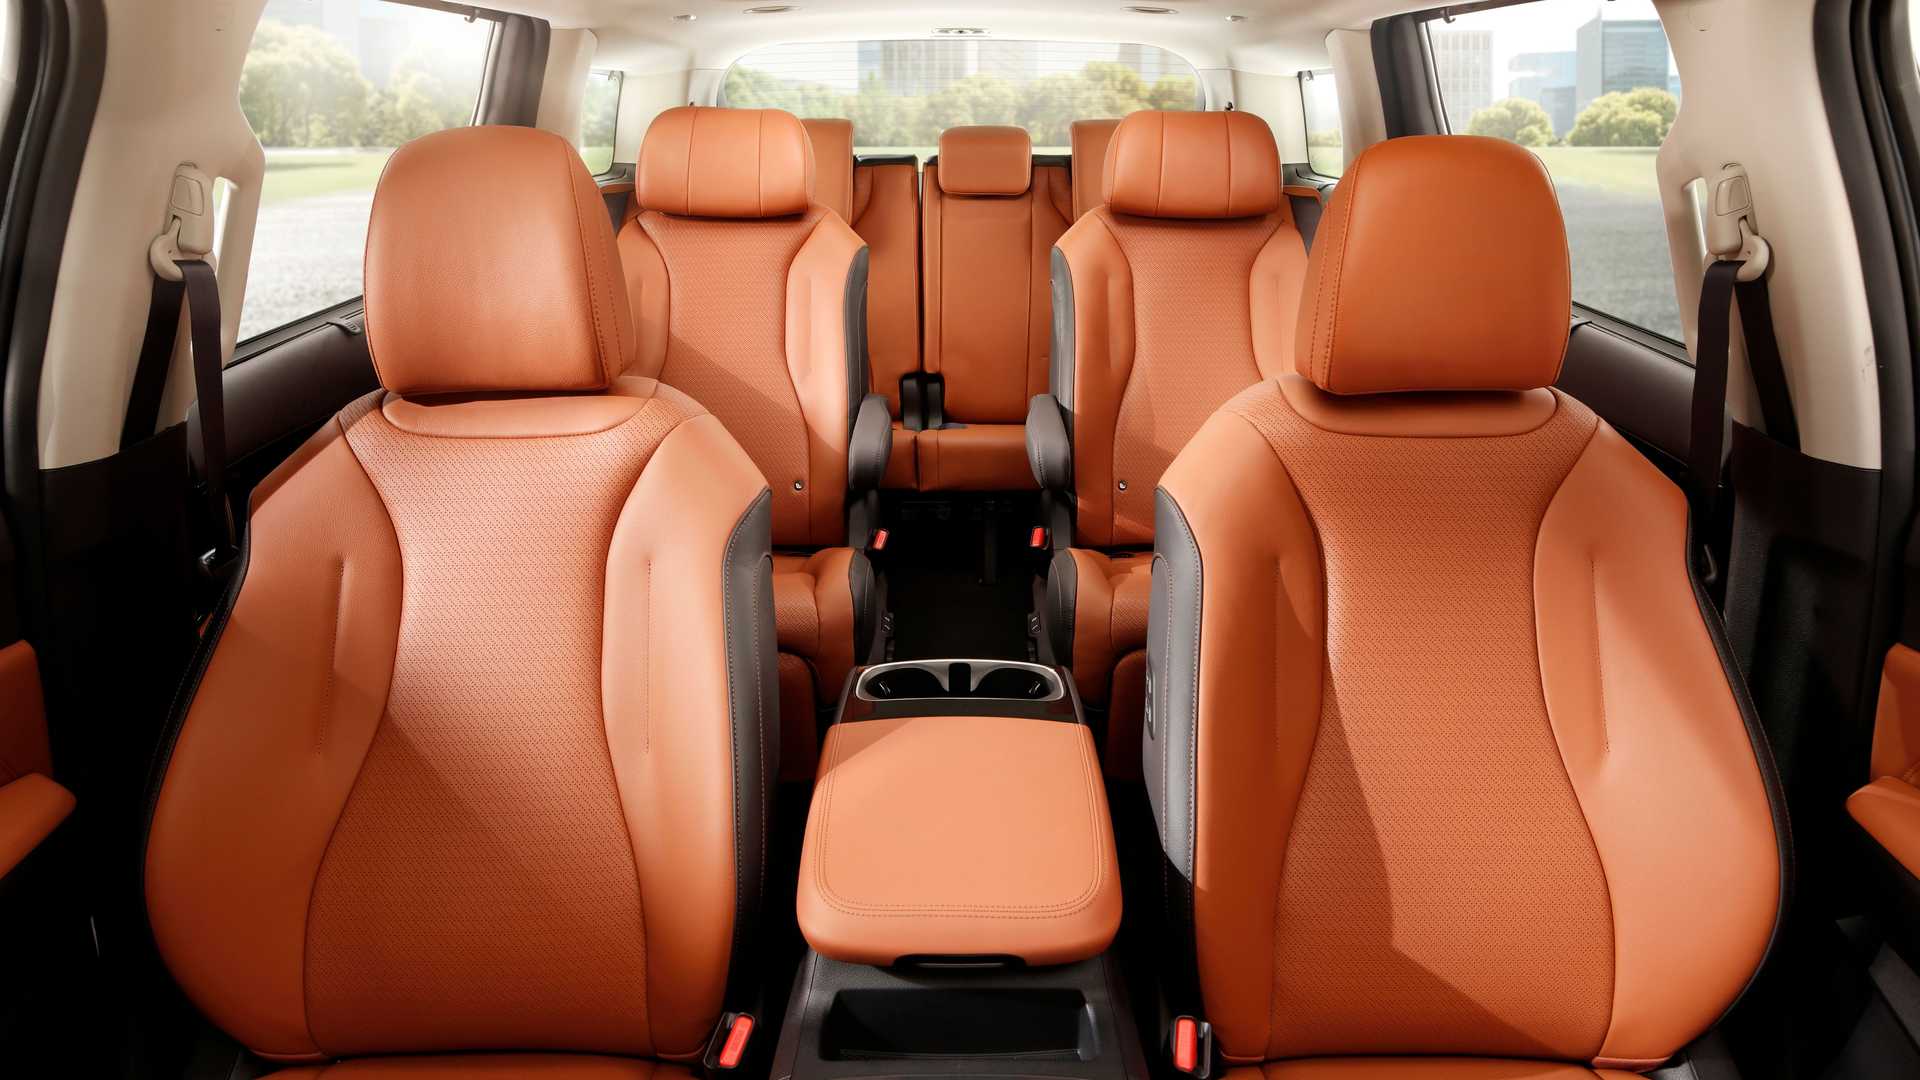 This New Kia Seats 11 People So, Go Ahead And Bring The Entire Family